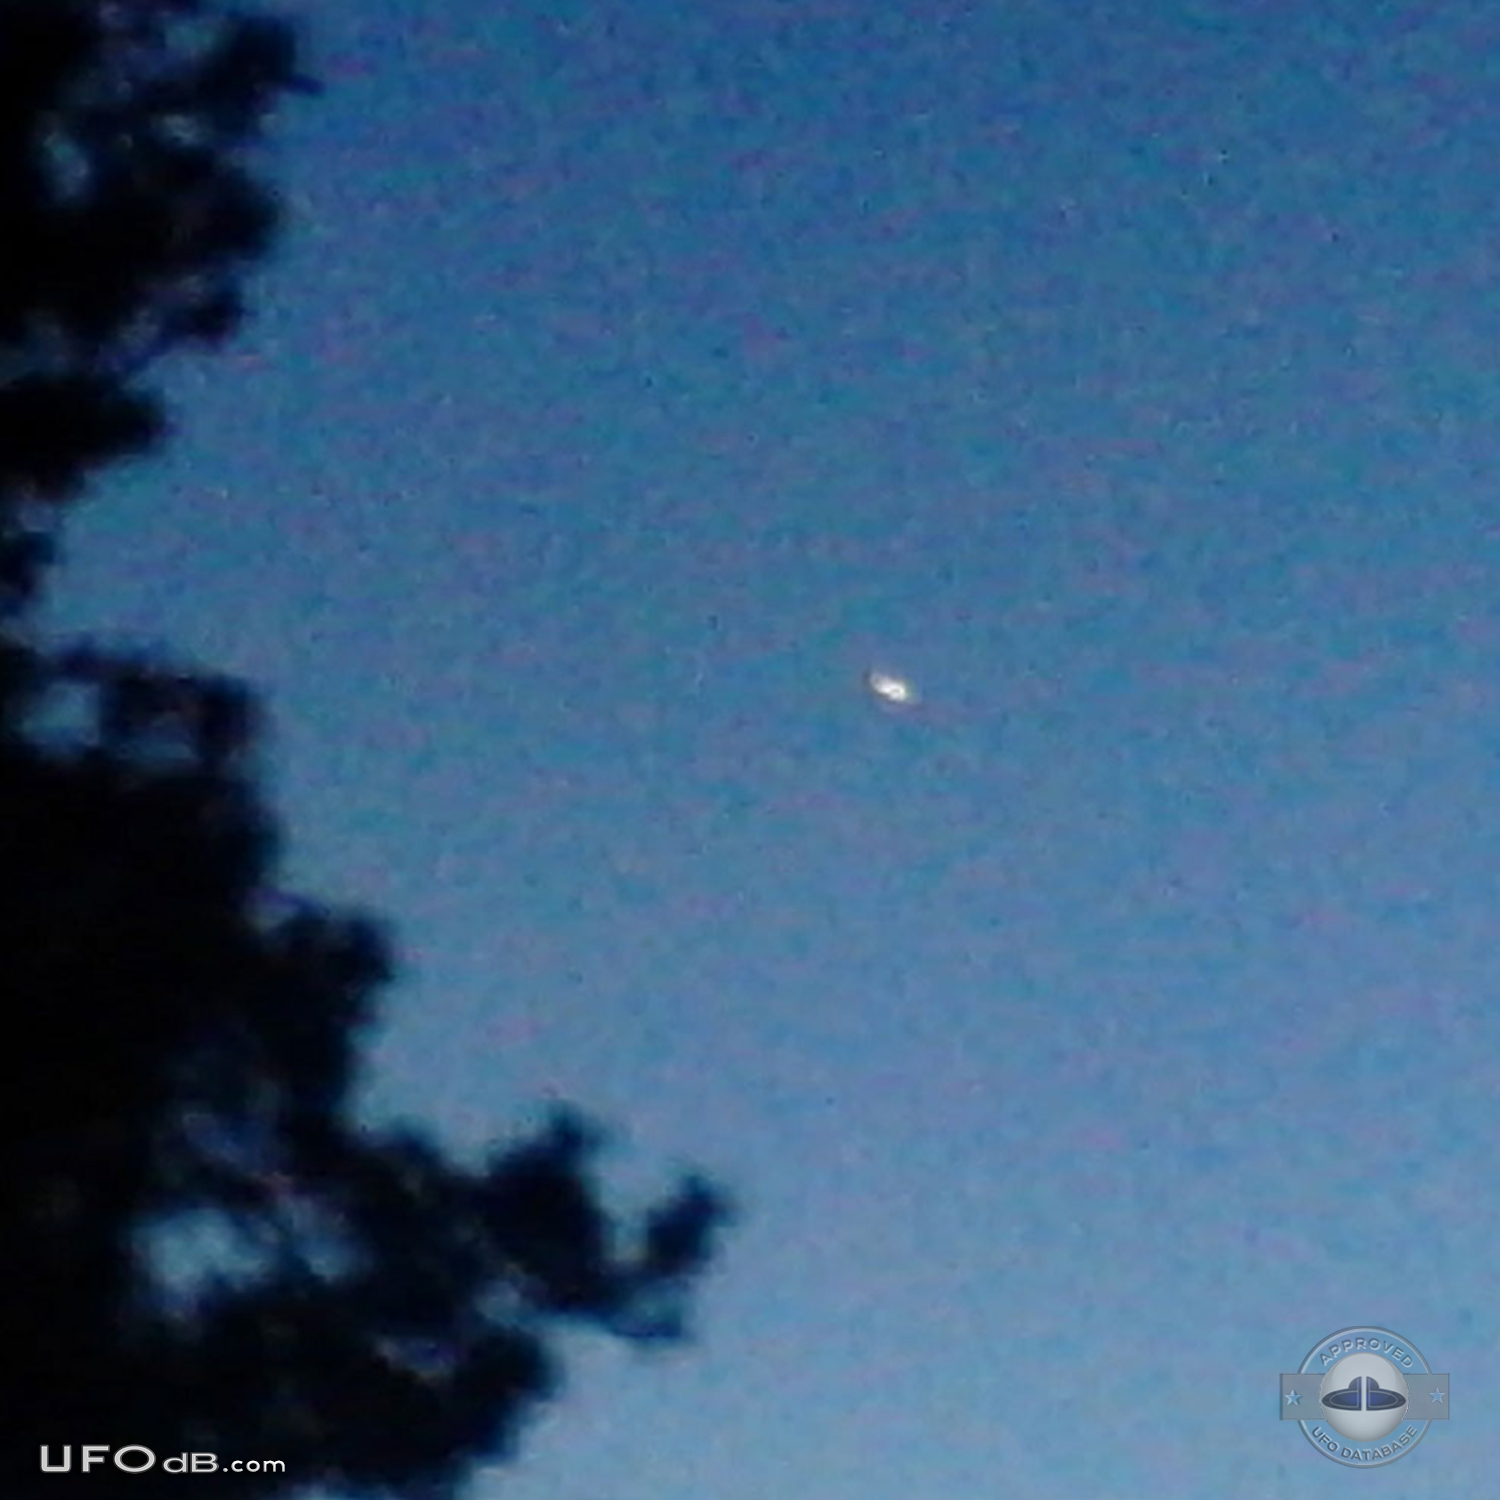 Unmoving Star turns out to be a UFO in Cooma, NSW, Australia 2012 UFO Picture #477-2